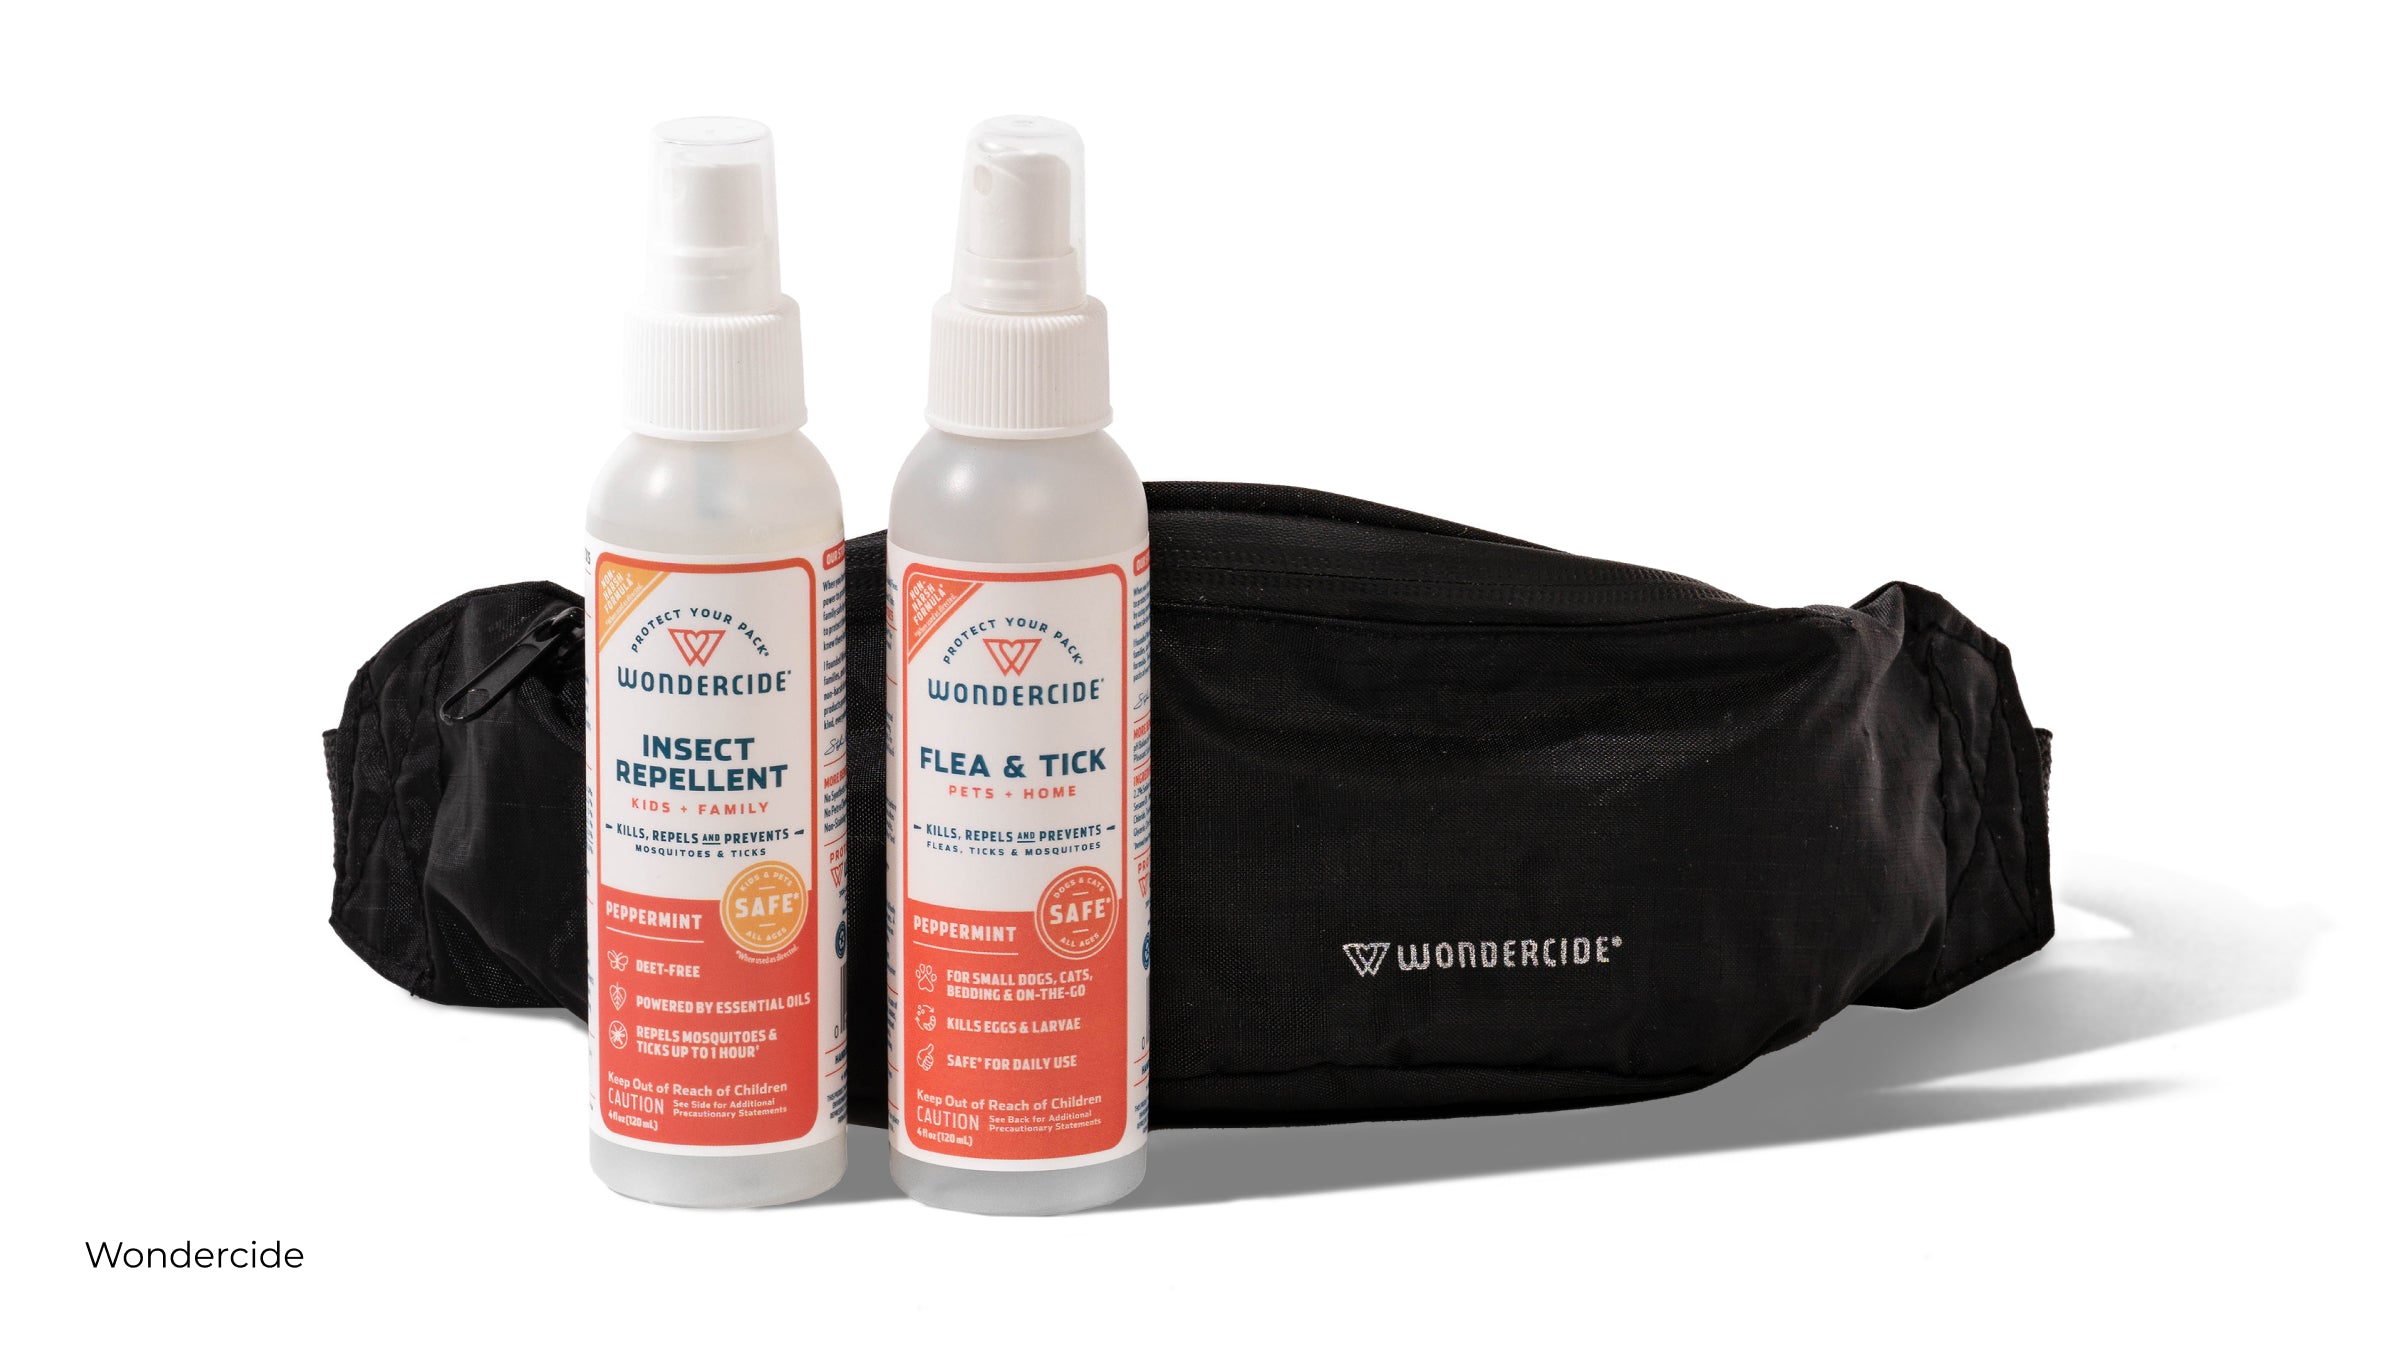 Black sling bag with Wondercide logo and two small spray bottles of Insect Repellent and Flea & Tick spray